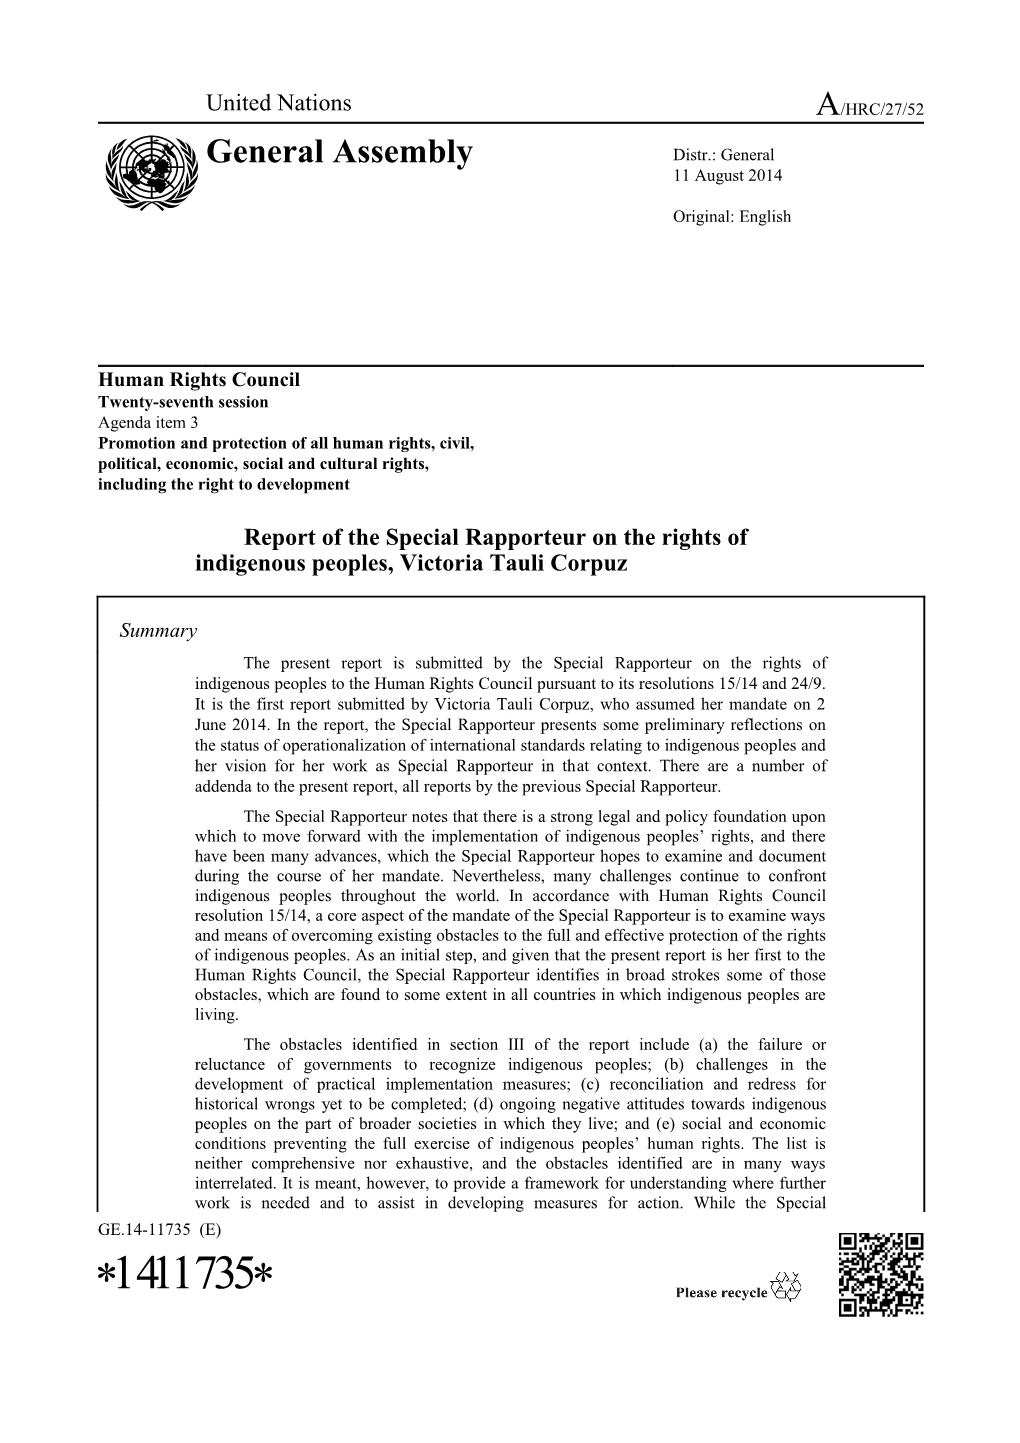 Report of the Special Rapporteur on the Rights of Indigenous Peoples in English